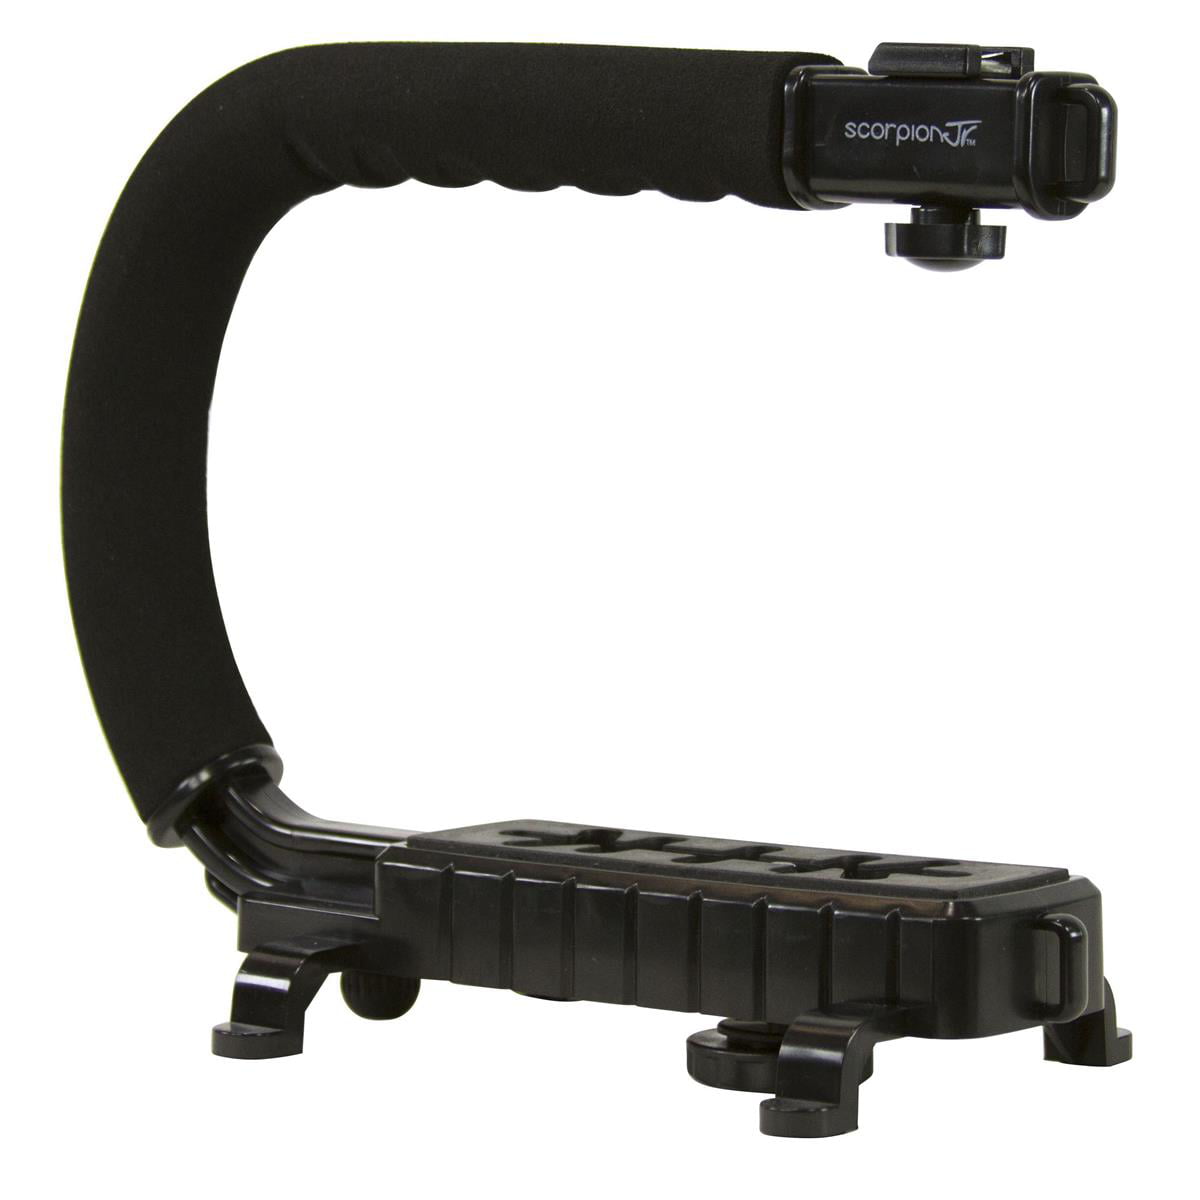 Opteka CXS-2 Dual-Grip Video Shoulder Stabilizer Support System with 15mm Accessory Rods for Digital SLR Cameras